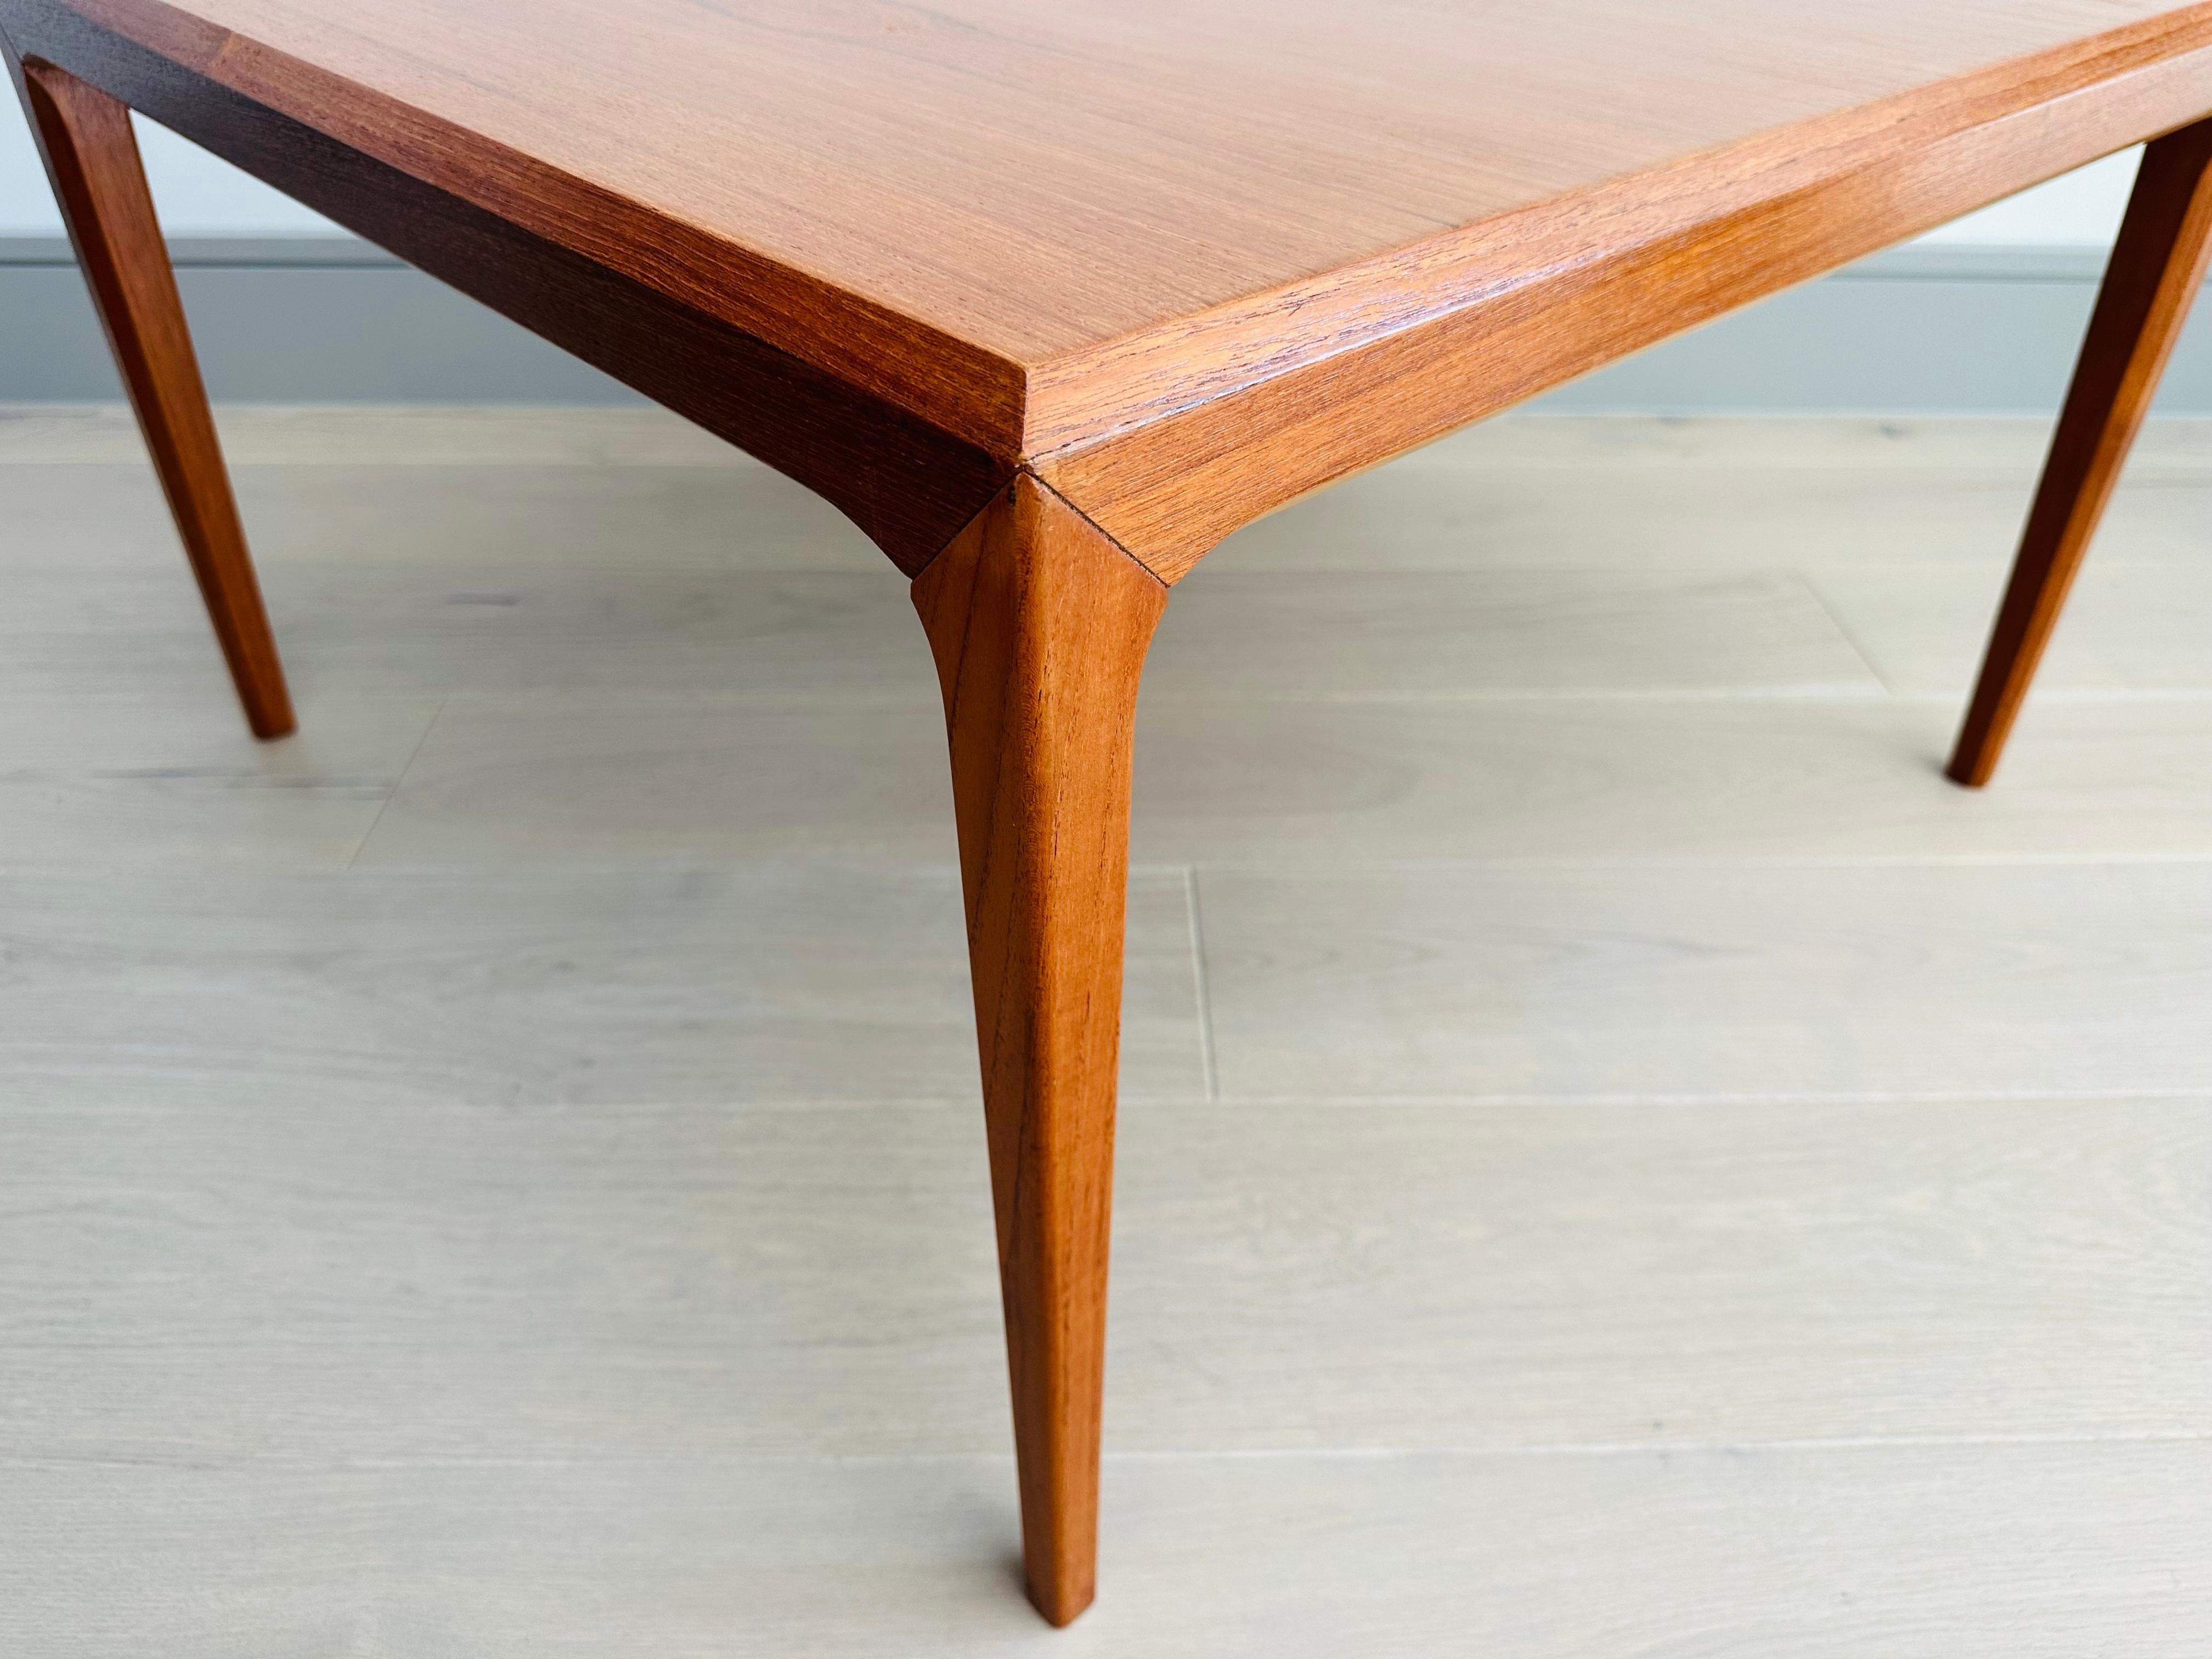 1960s Danish Silkeborg Furniture Square Teak Coffee Table by Johannes Andersen For Sale 3